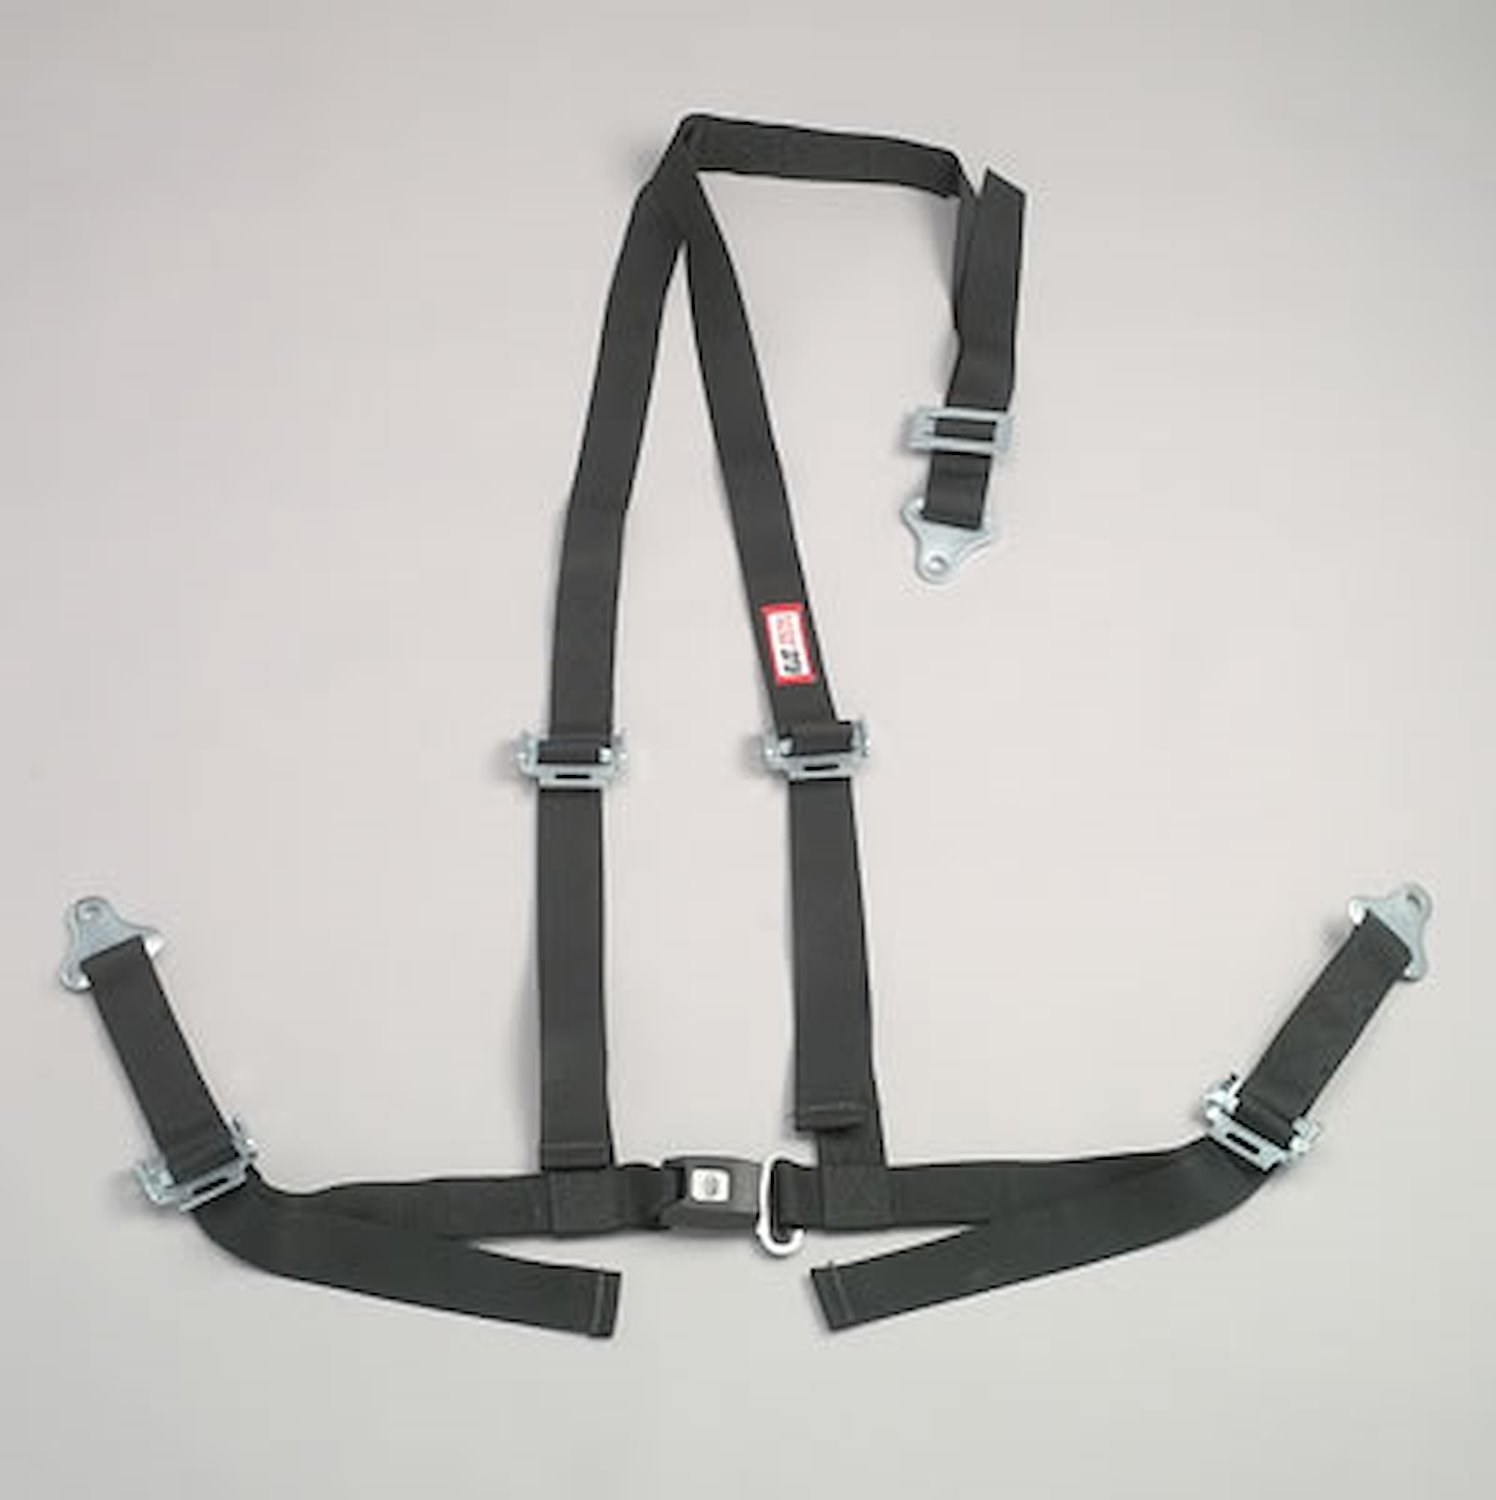 NON-SFI B&T HARNESS 2 PULL UP Lap Belt SNAP 2 S. H. Individual FLOOR Mount WRAP/SNAP w/STERNUM STRAP RED